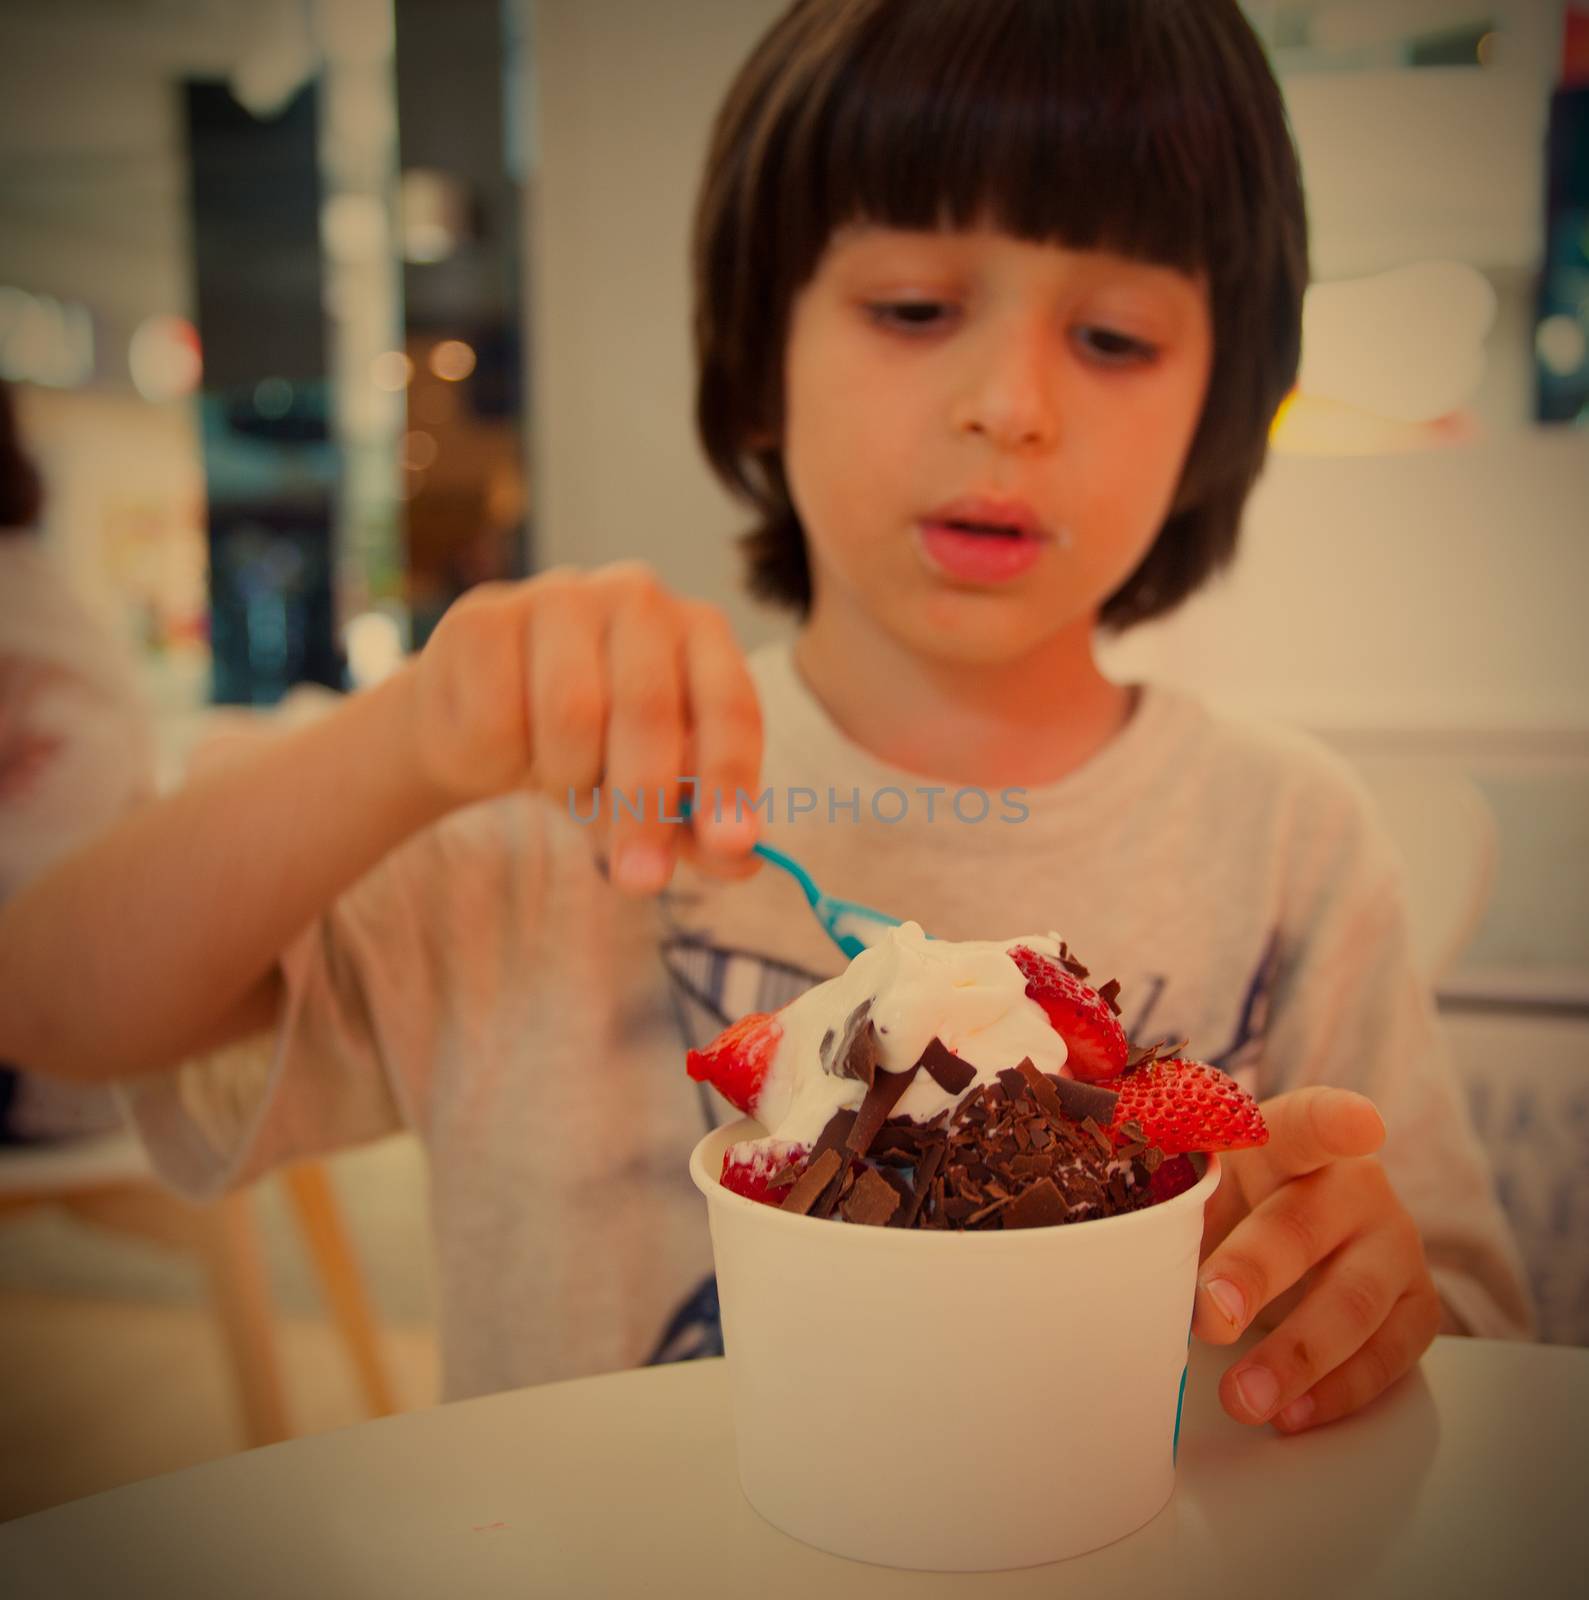 boy eating ice cream with chocolate and strawberries, instargram filter style, editorial use only